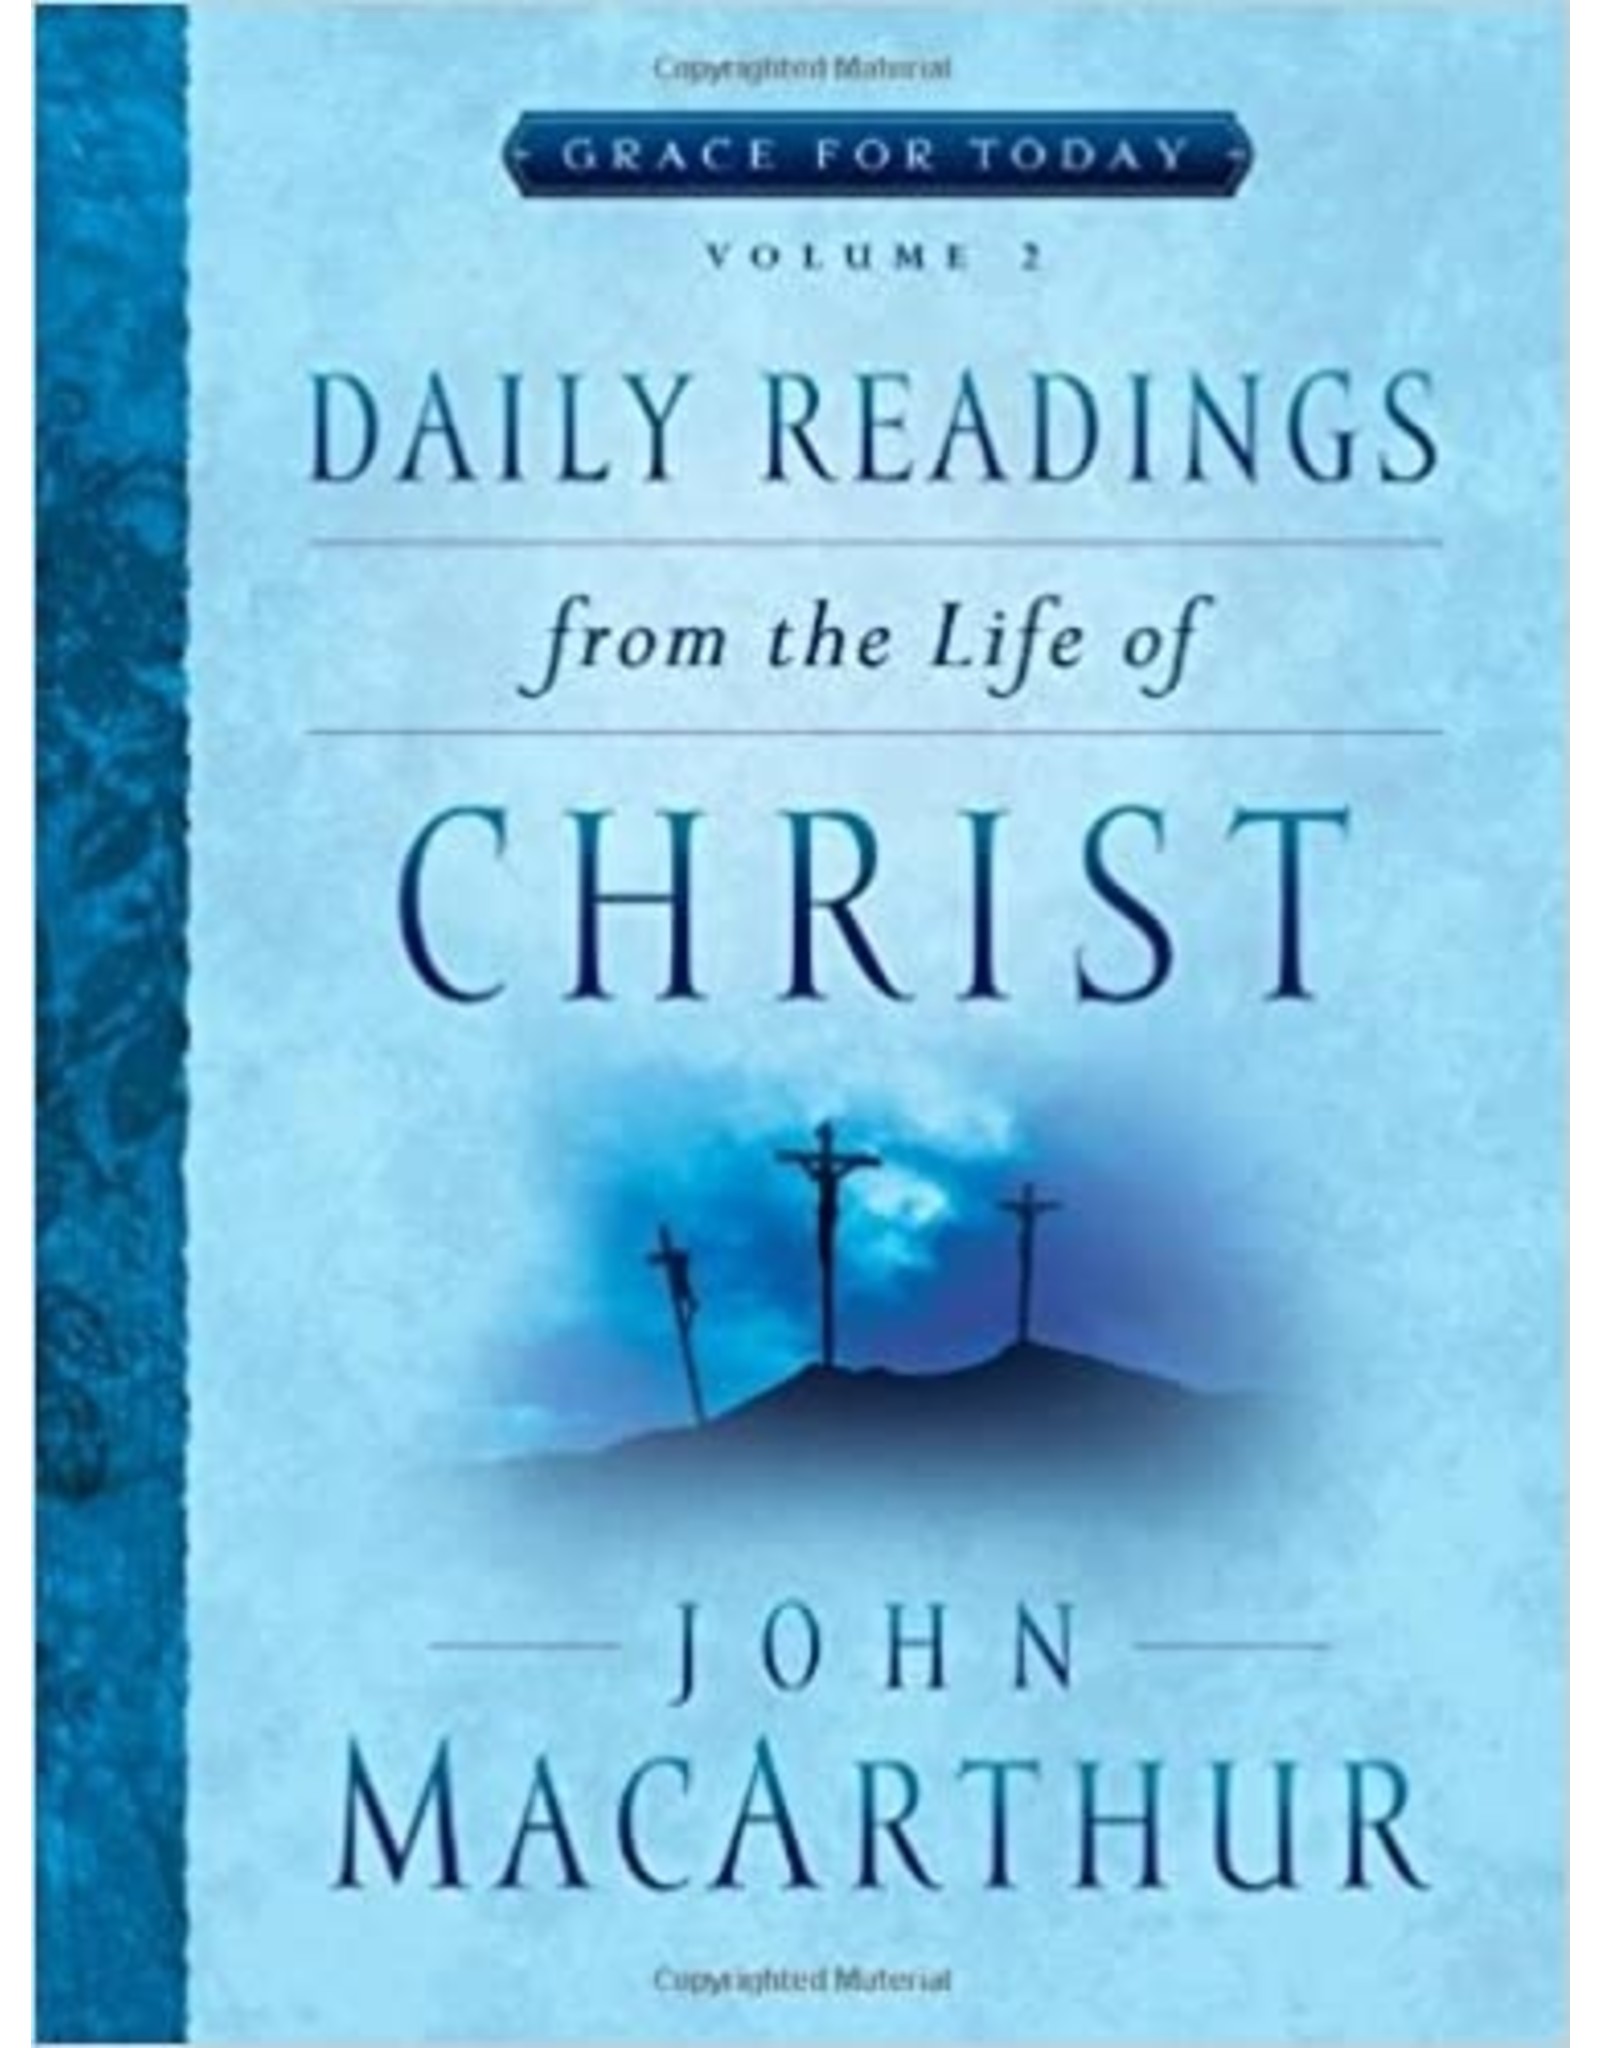 Moody Publishers Daily Readings from the Life of Christ ( Vol. 2 )